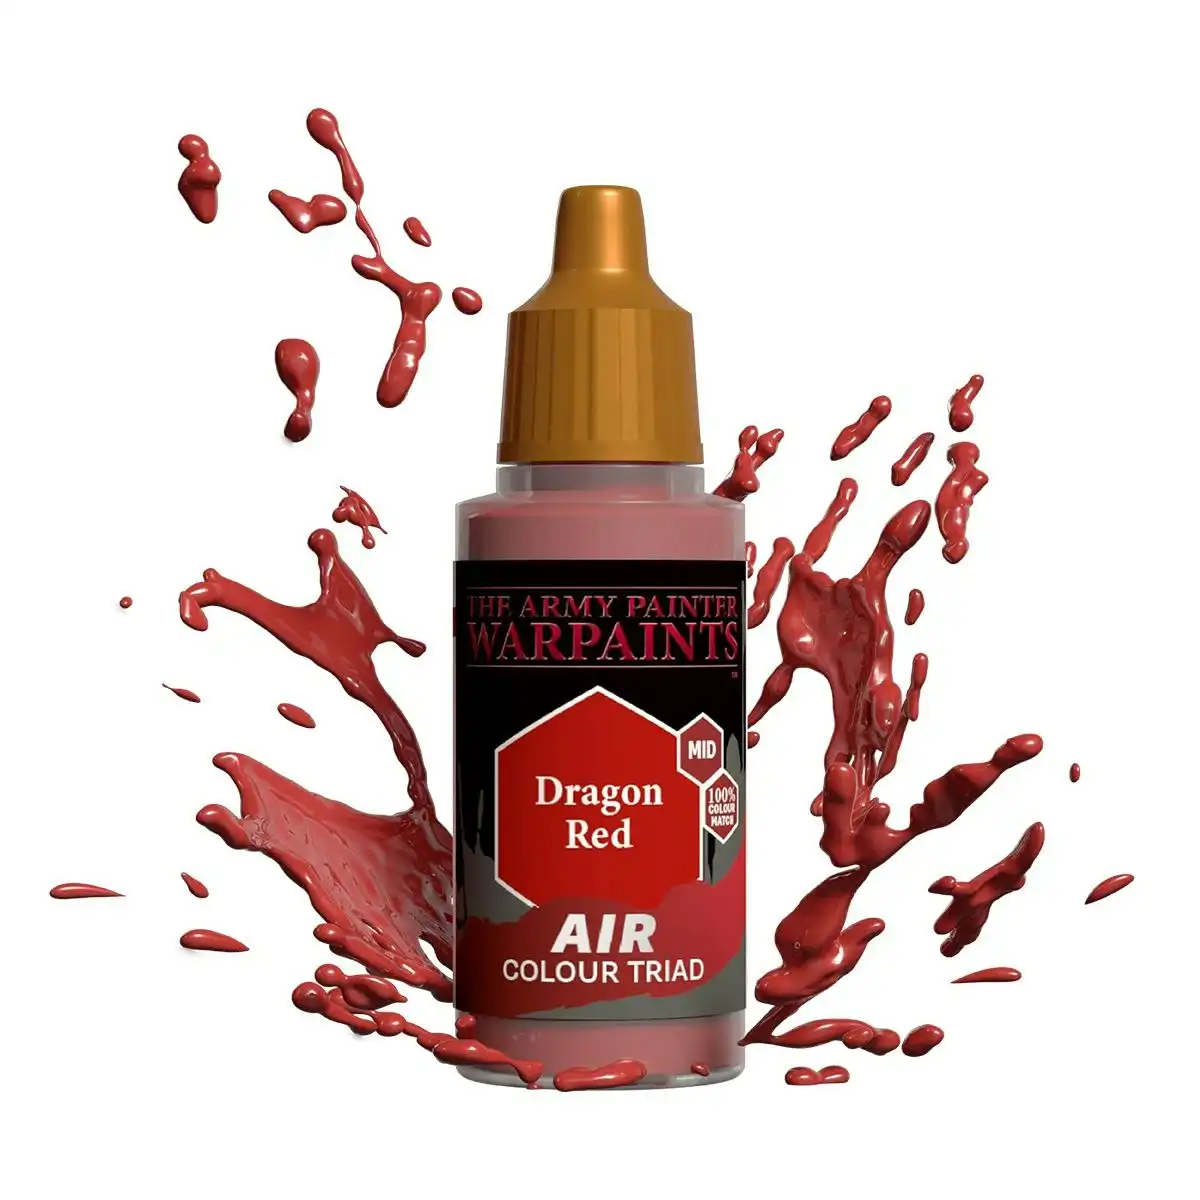 Army Painter Warpaints - Air Dragon Red Acrylic Paint 18ml